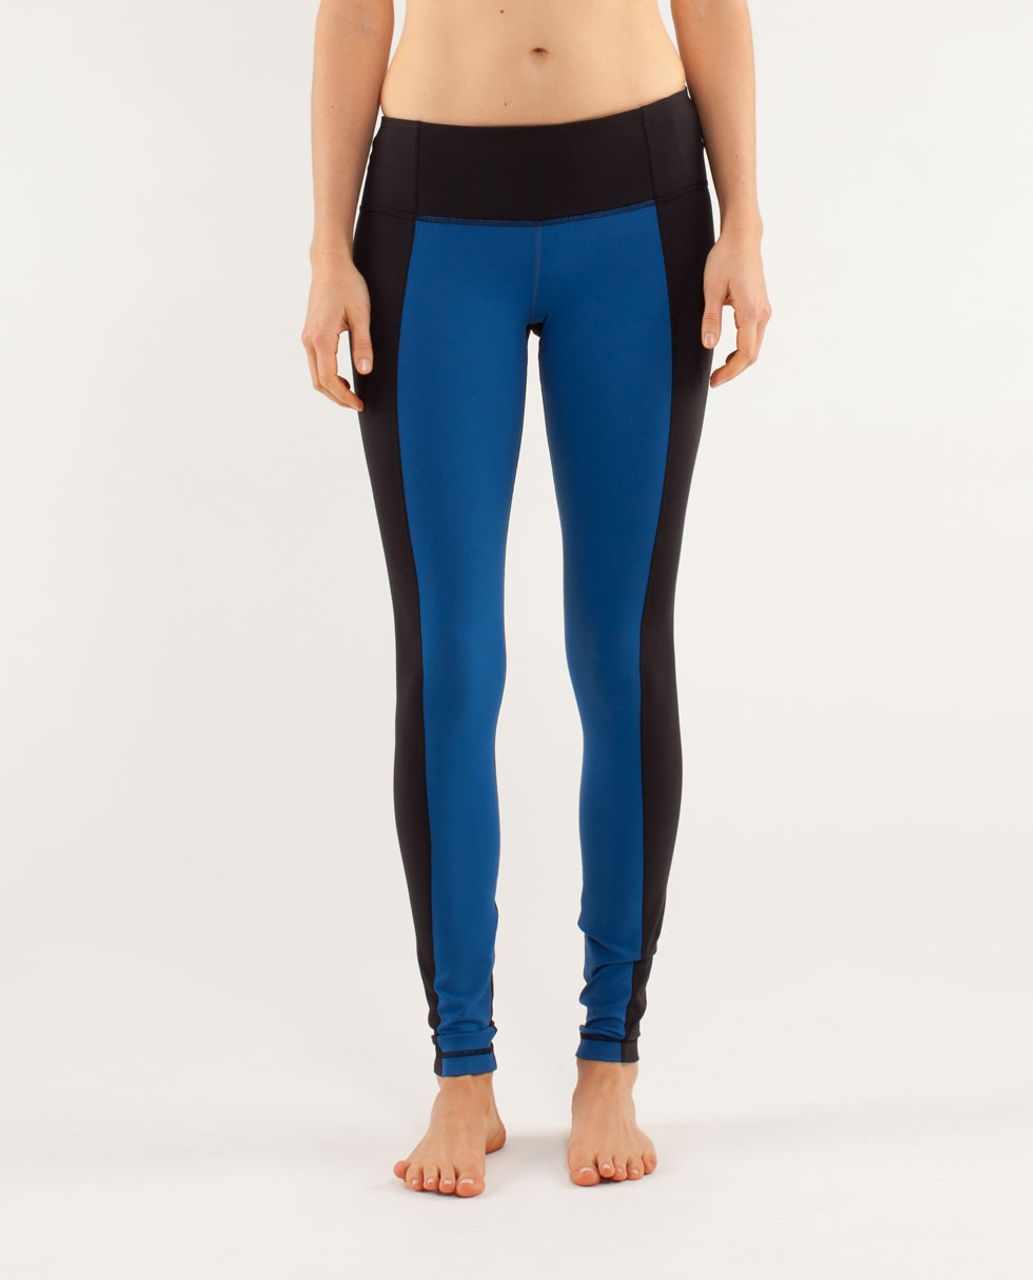 Lululemon Wunder Under Pant size 4 Wee Are From Space Cashew Black